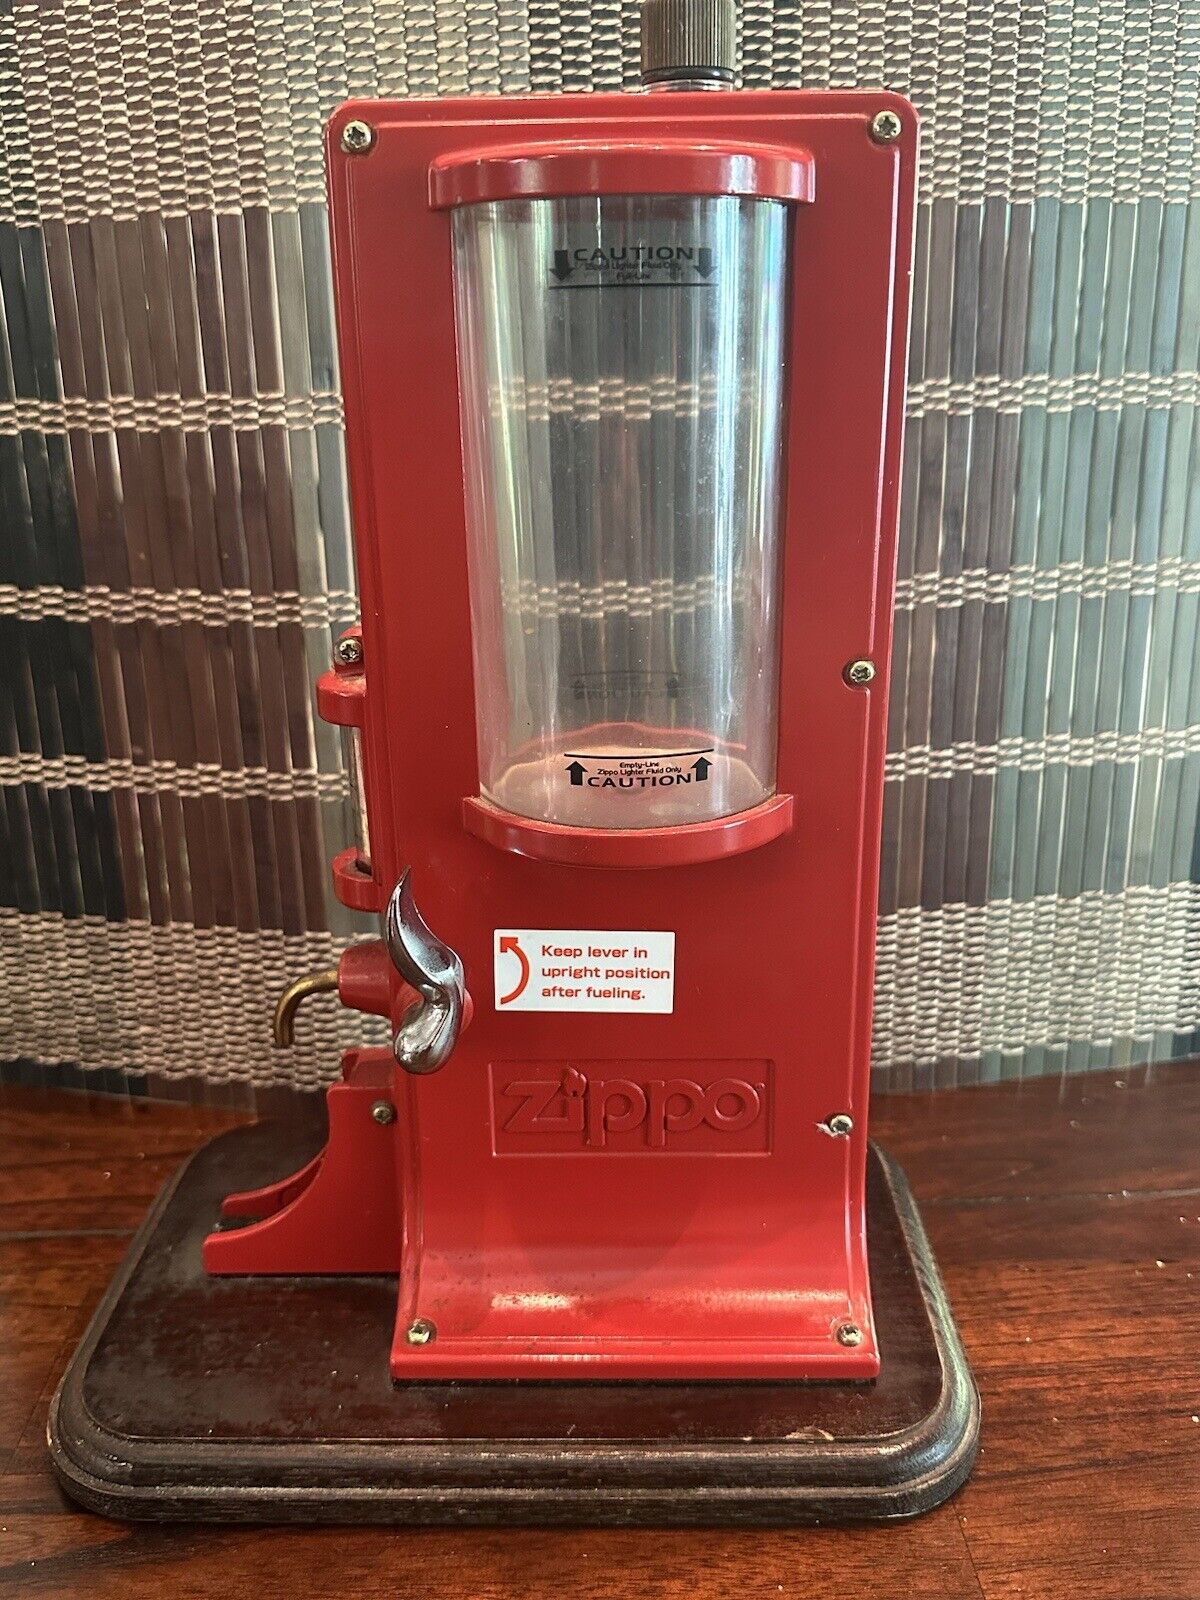 Zippo Fuel Station Fuel Dispenser Stand Object Red Reconditioned by Zippo Used